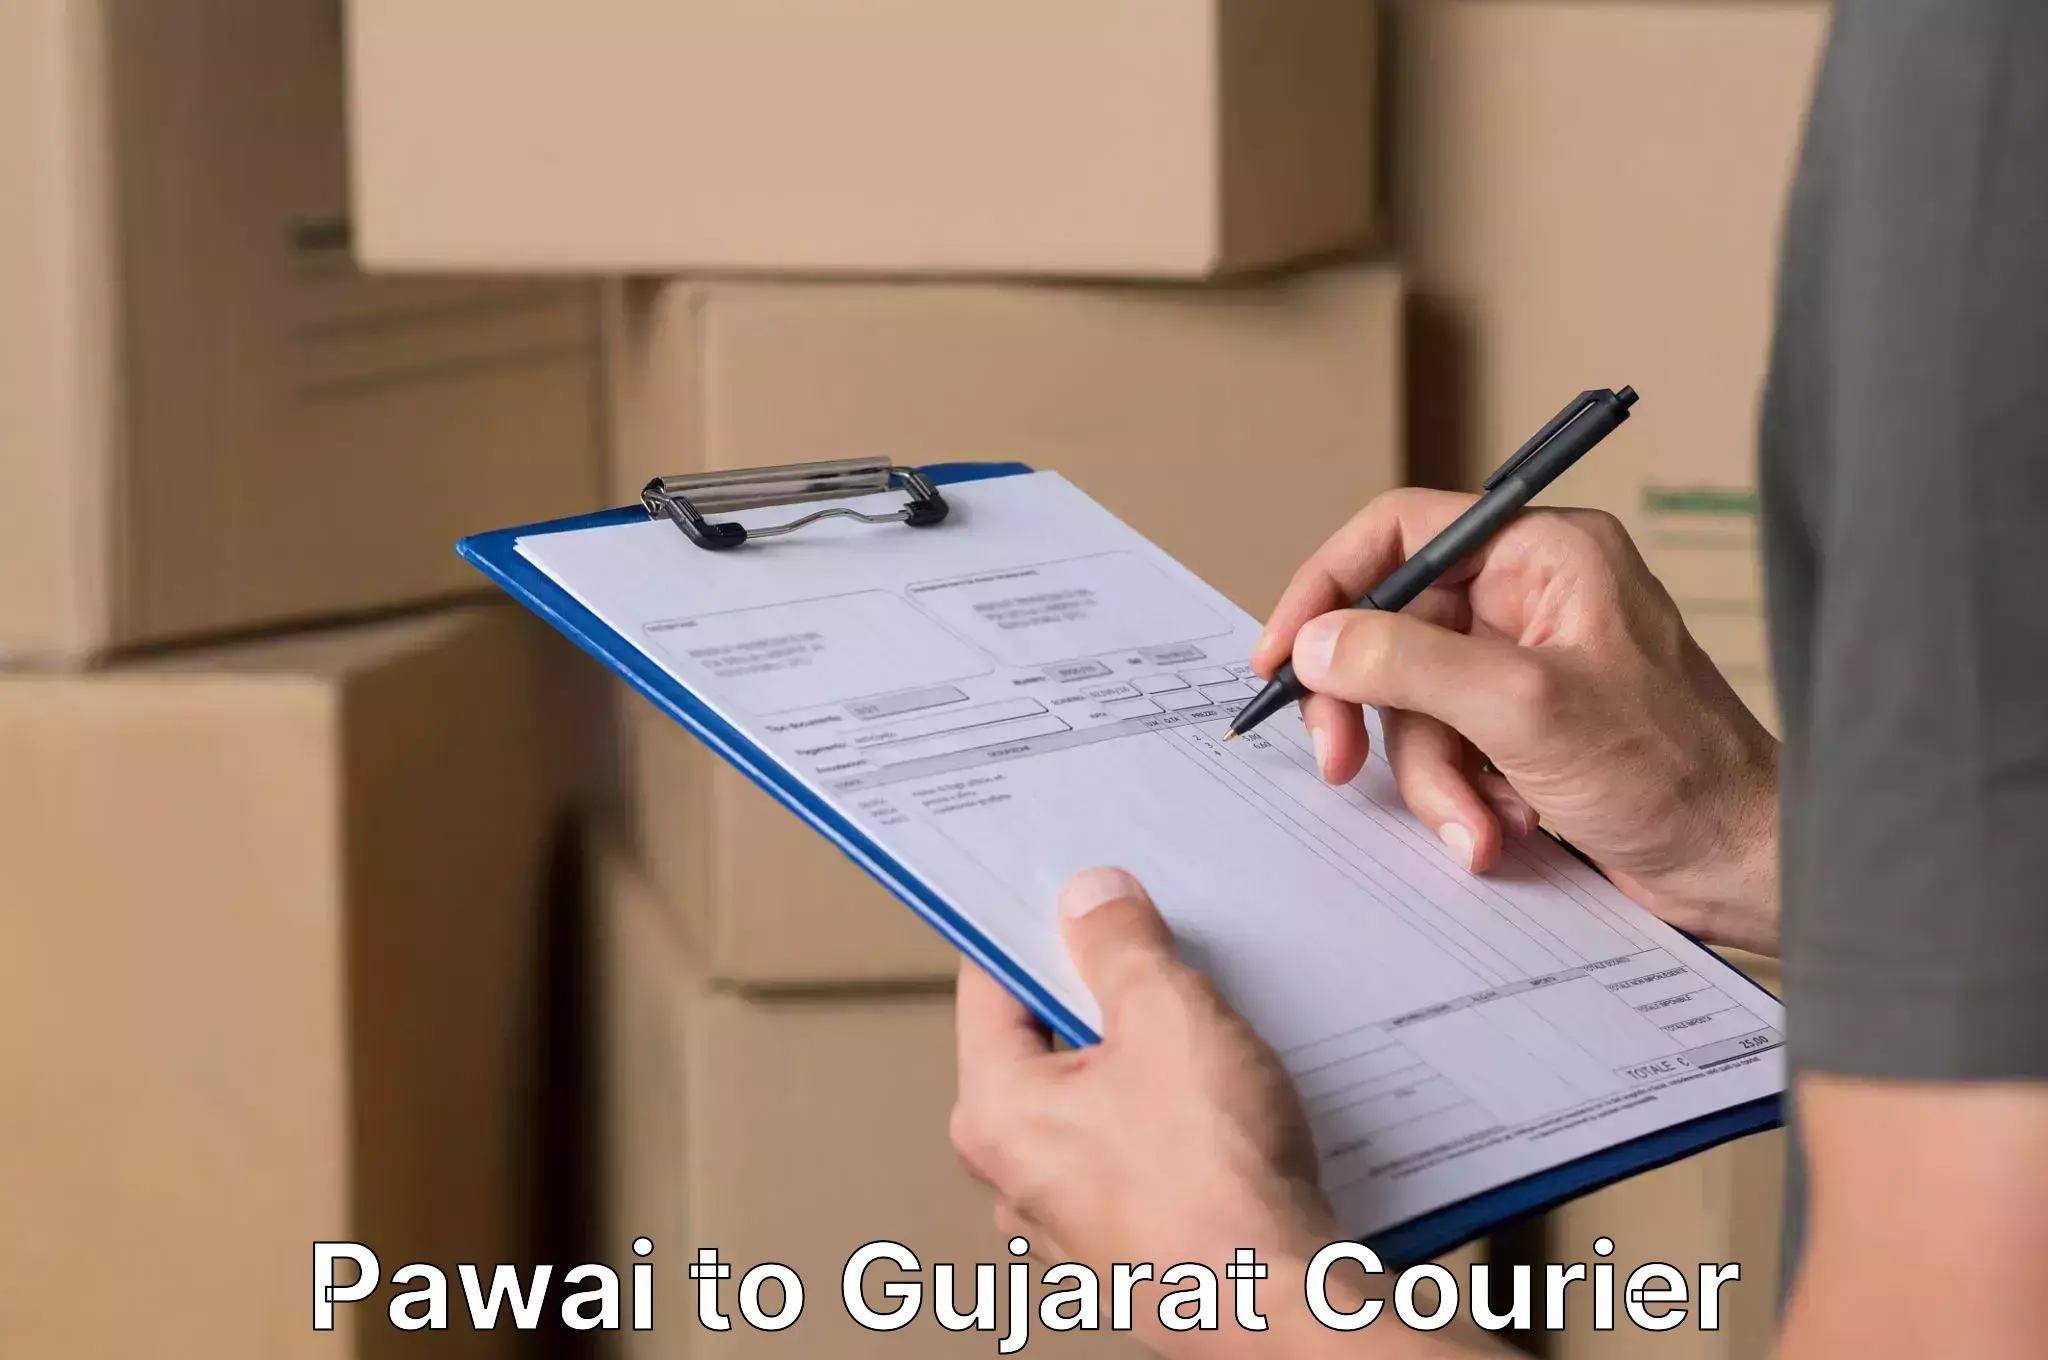 Furniture moving specialists Pawai to Gujarat